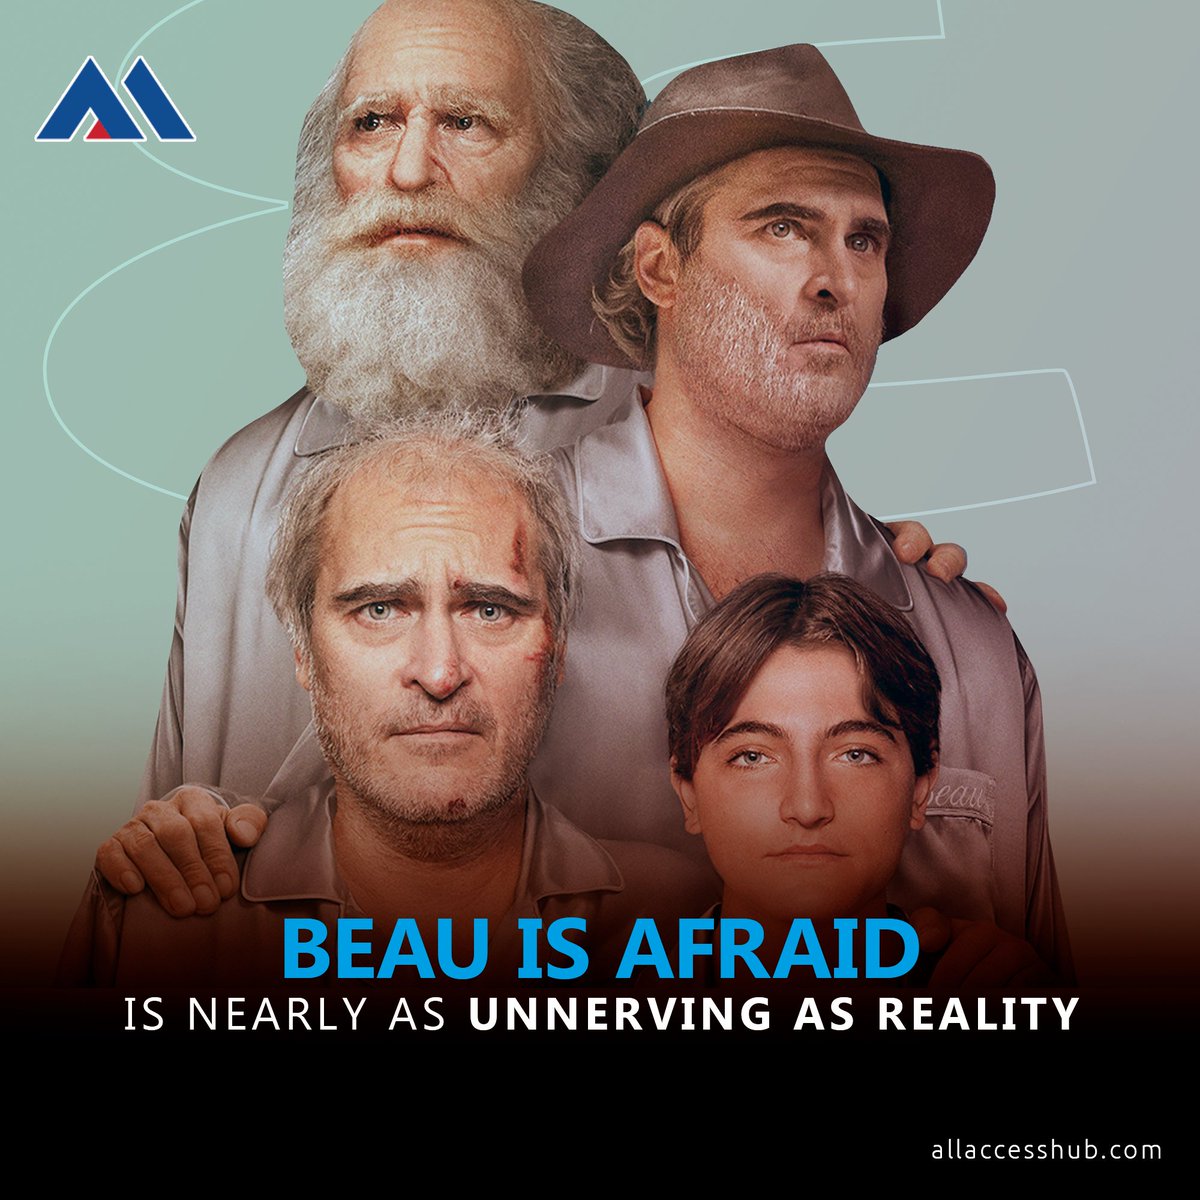 ‘Beau Is Afraid’ Is Nearly as Unnerving as Reality. For more details visit: allaccesshub.com/beau-is-afraid…
#allaccesshub #onlinestreaming #Hollywood #MovieIndustry #AriAster #Horror #ScaryMovies #Thriller #JoaquinPhoenix #Joker #JoaquinPhoenixFans #TheMaster #WalkTheLine #Her #Gladiator